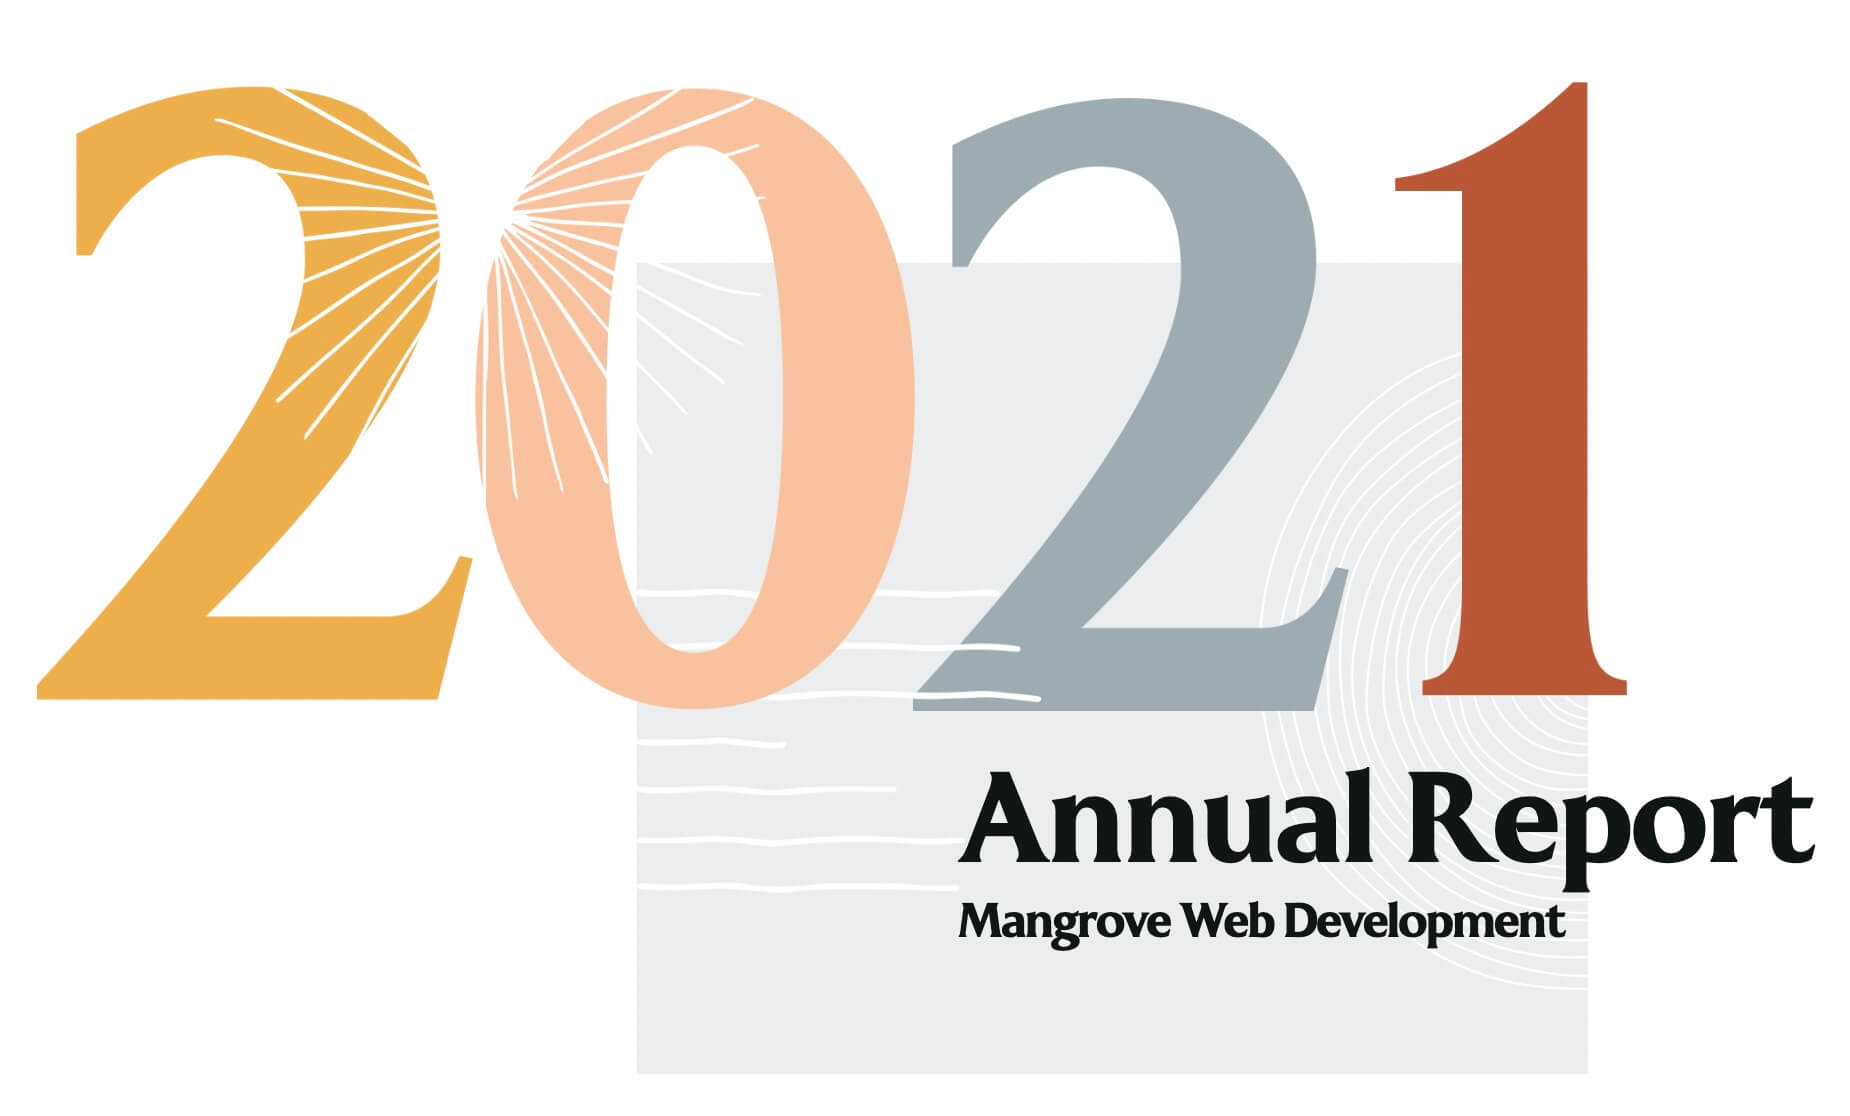 Styled text that says “2021 Annual Report Mangrove Web Development”, which is the headline for the full annual report.